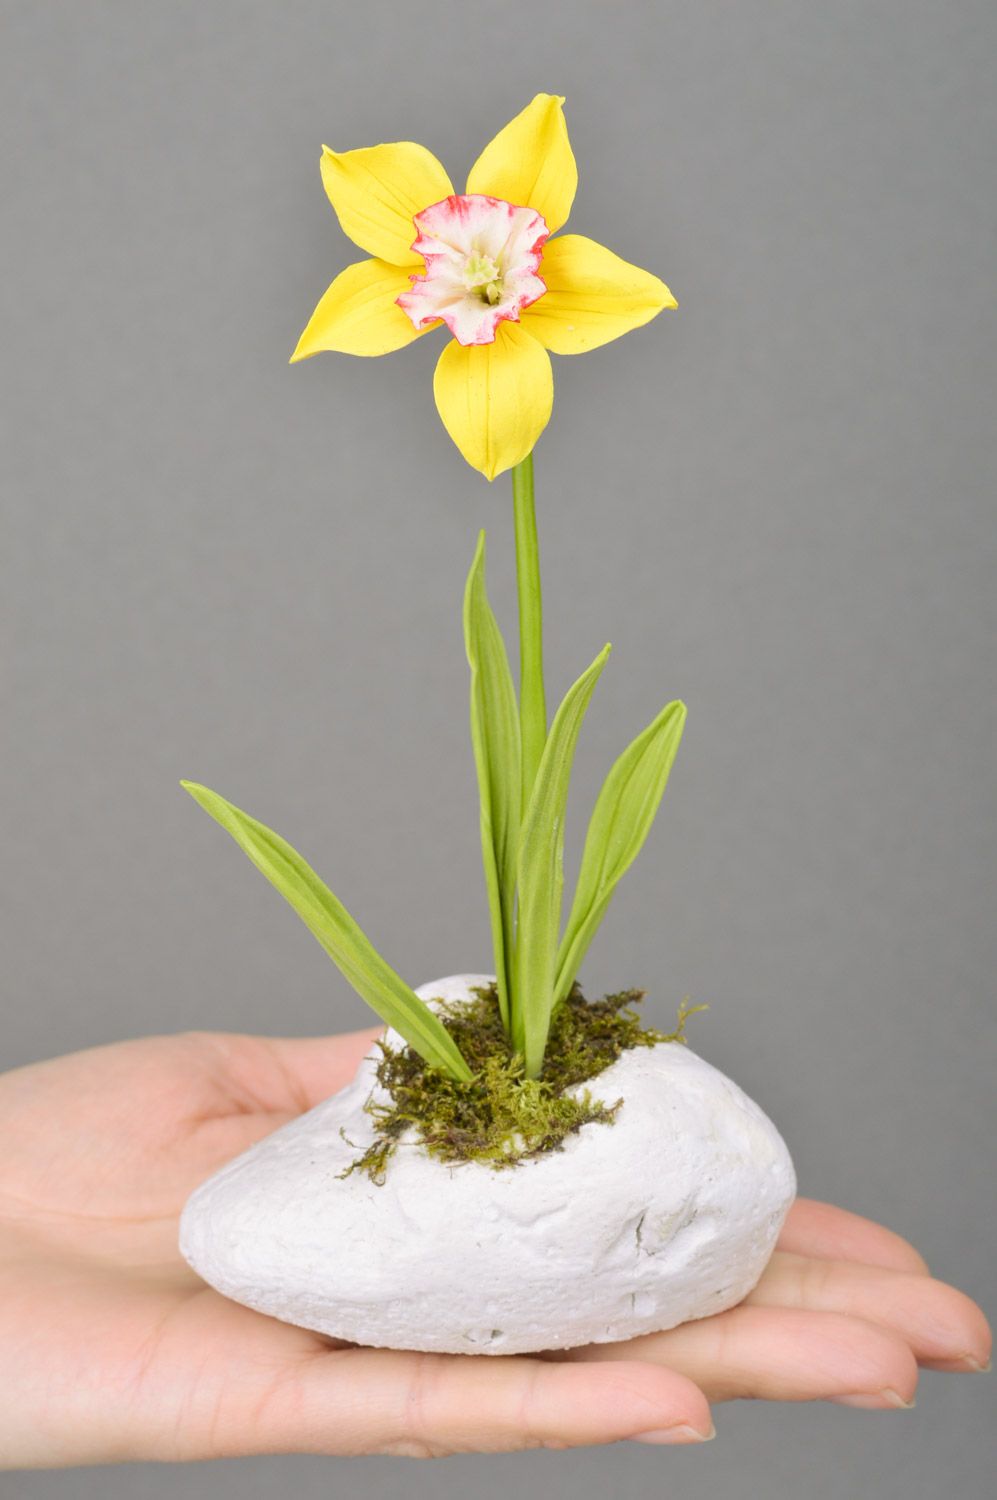 Handmade decorative yellow narcissus flower molded of polymer clay on stone basis photo 3